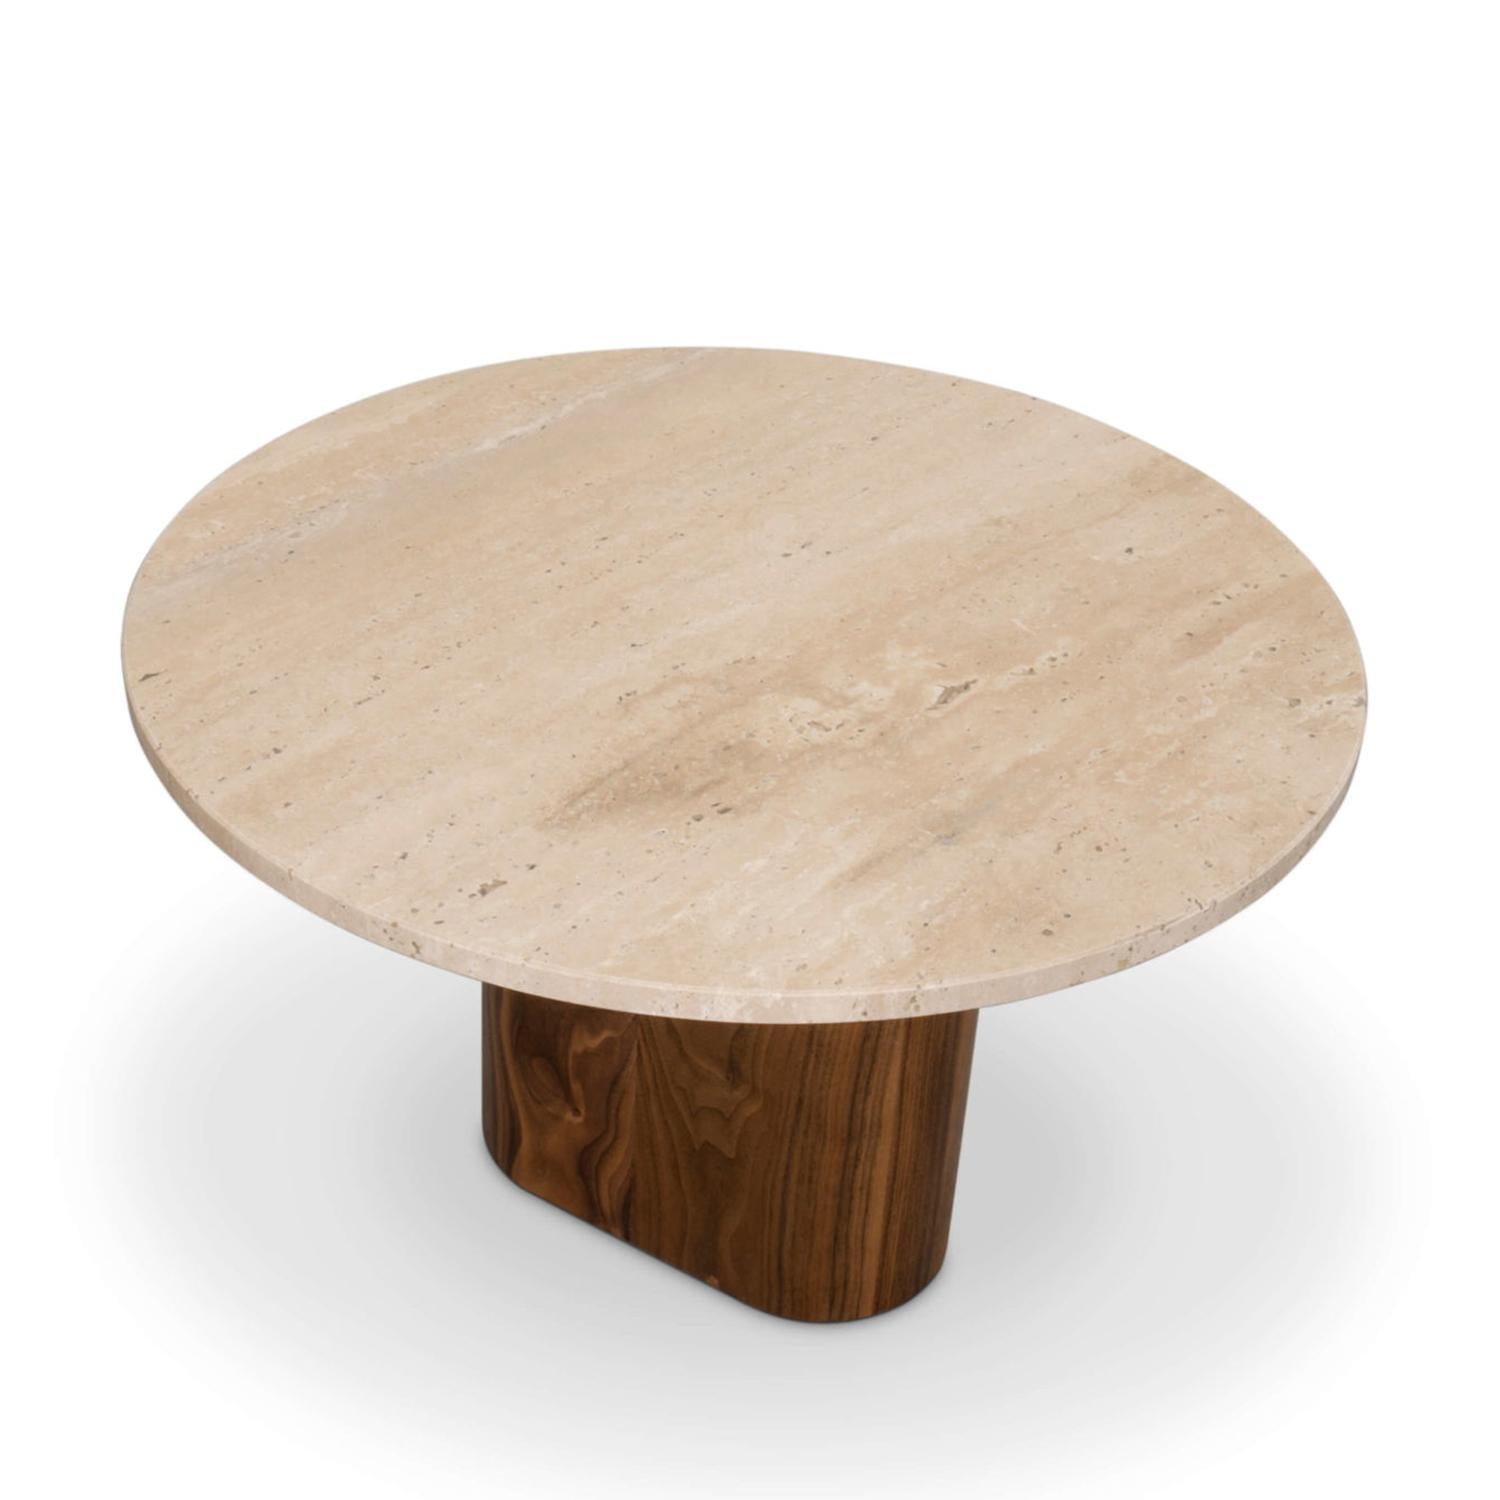 Side table Tessa with solid walnut 
wood bases and with travertine tabletop.